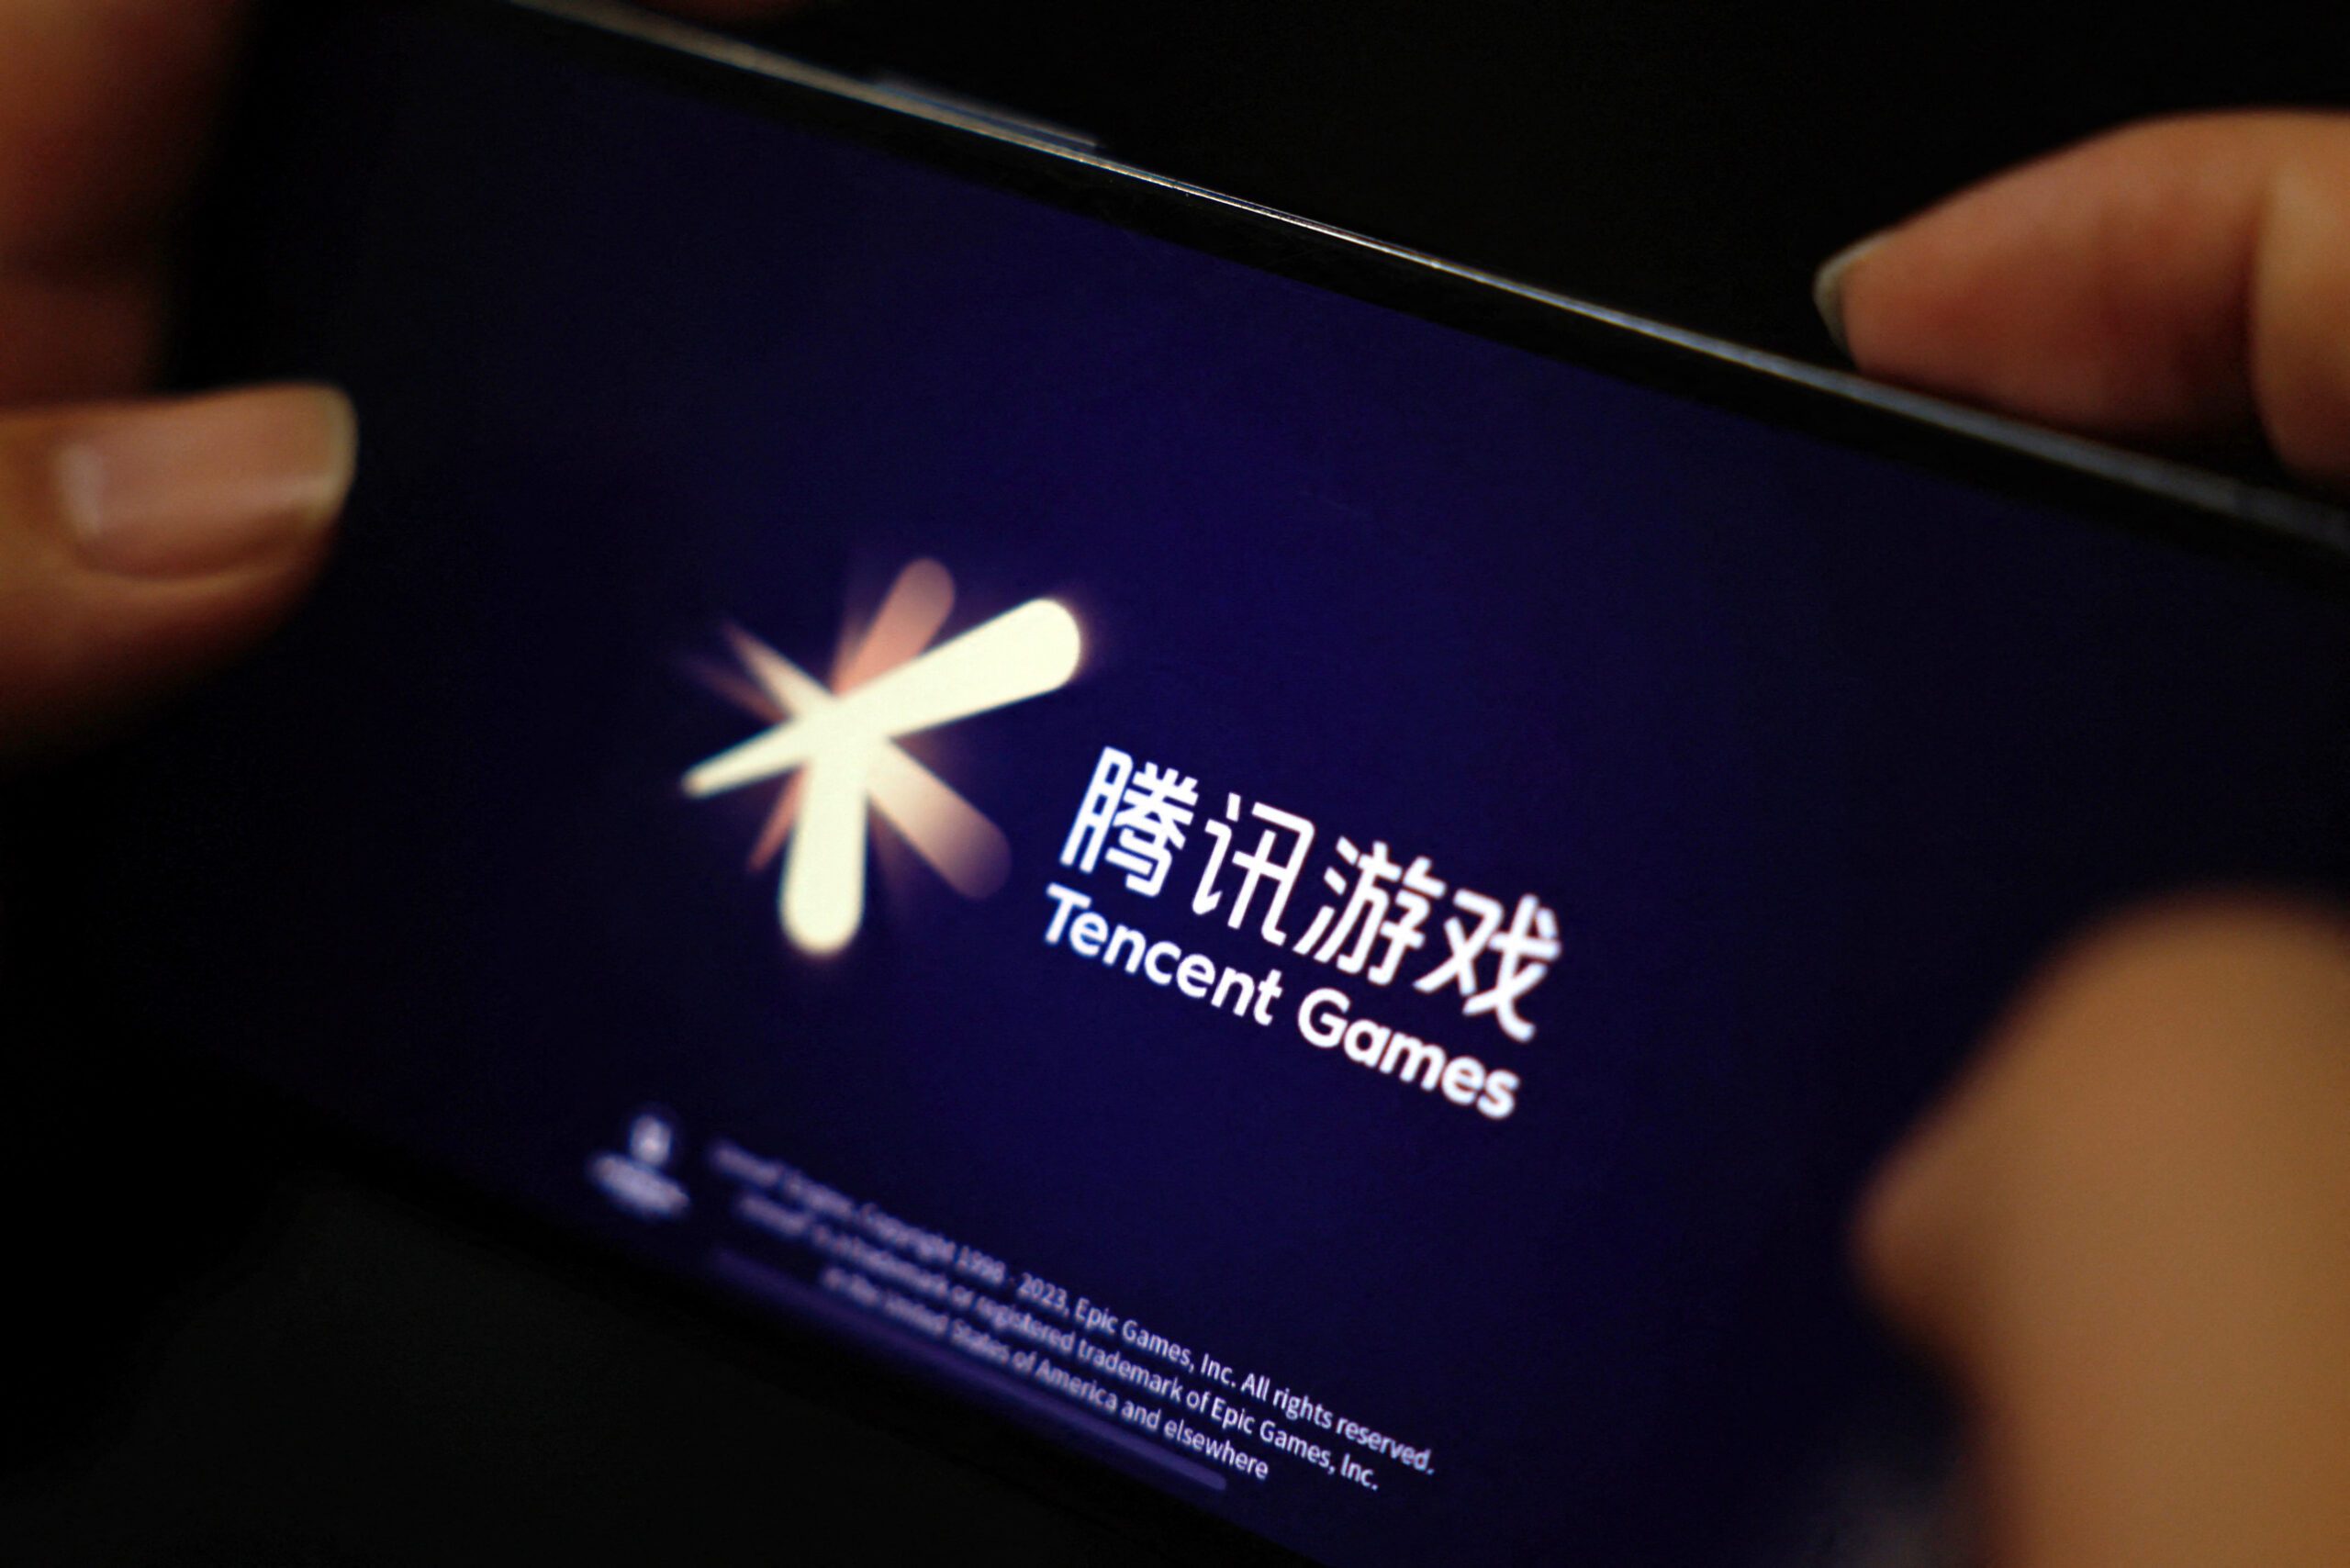 Tencent to release 'Dungeon and Fighter' mobile game next month